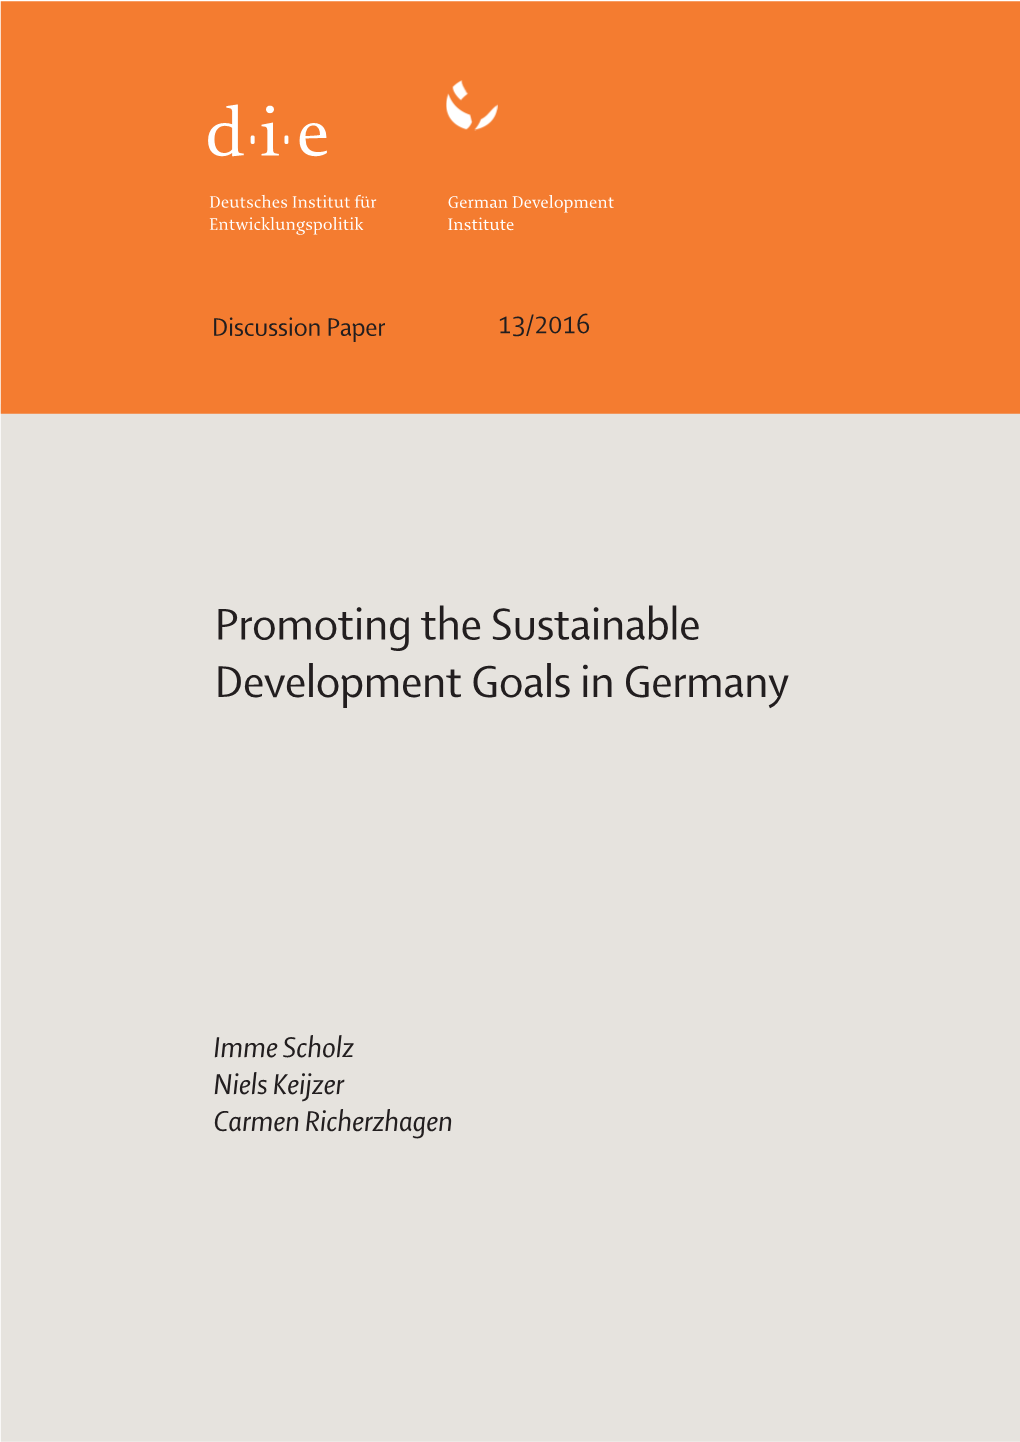 Promoting the Sustainable Development Goals in Germany